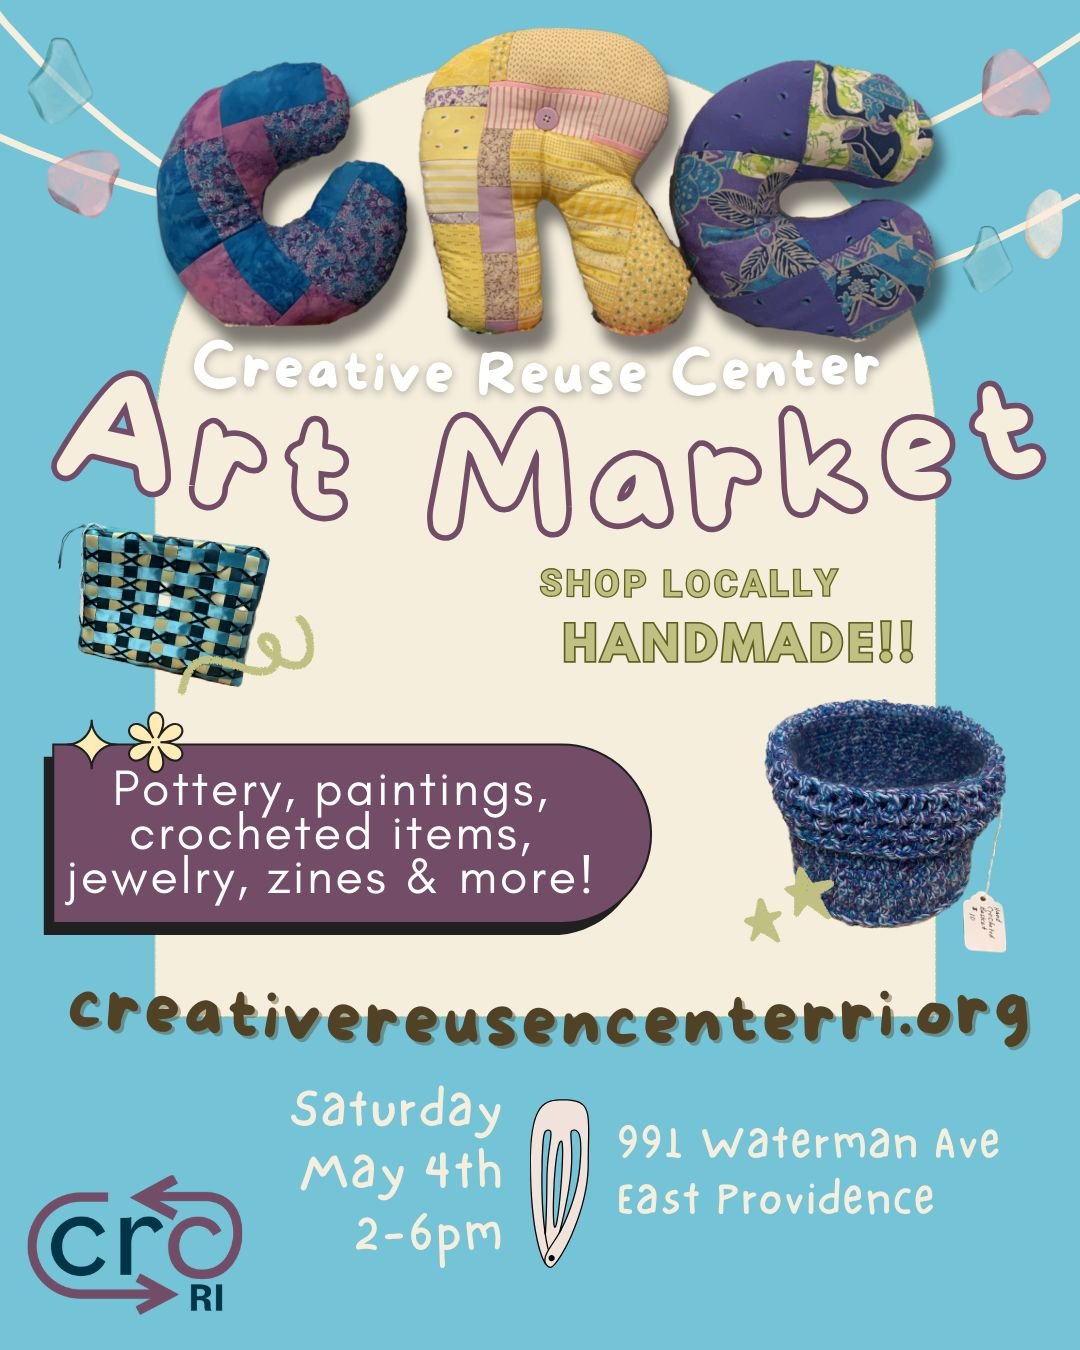 We can't wait to see at at our Art Market this Saturday from 2-6pm at the CRC!